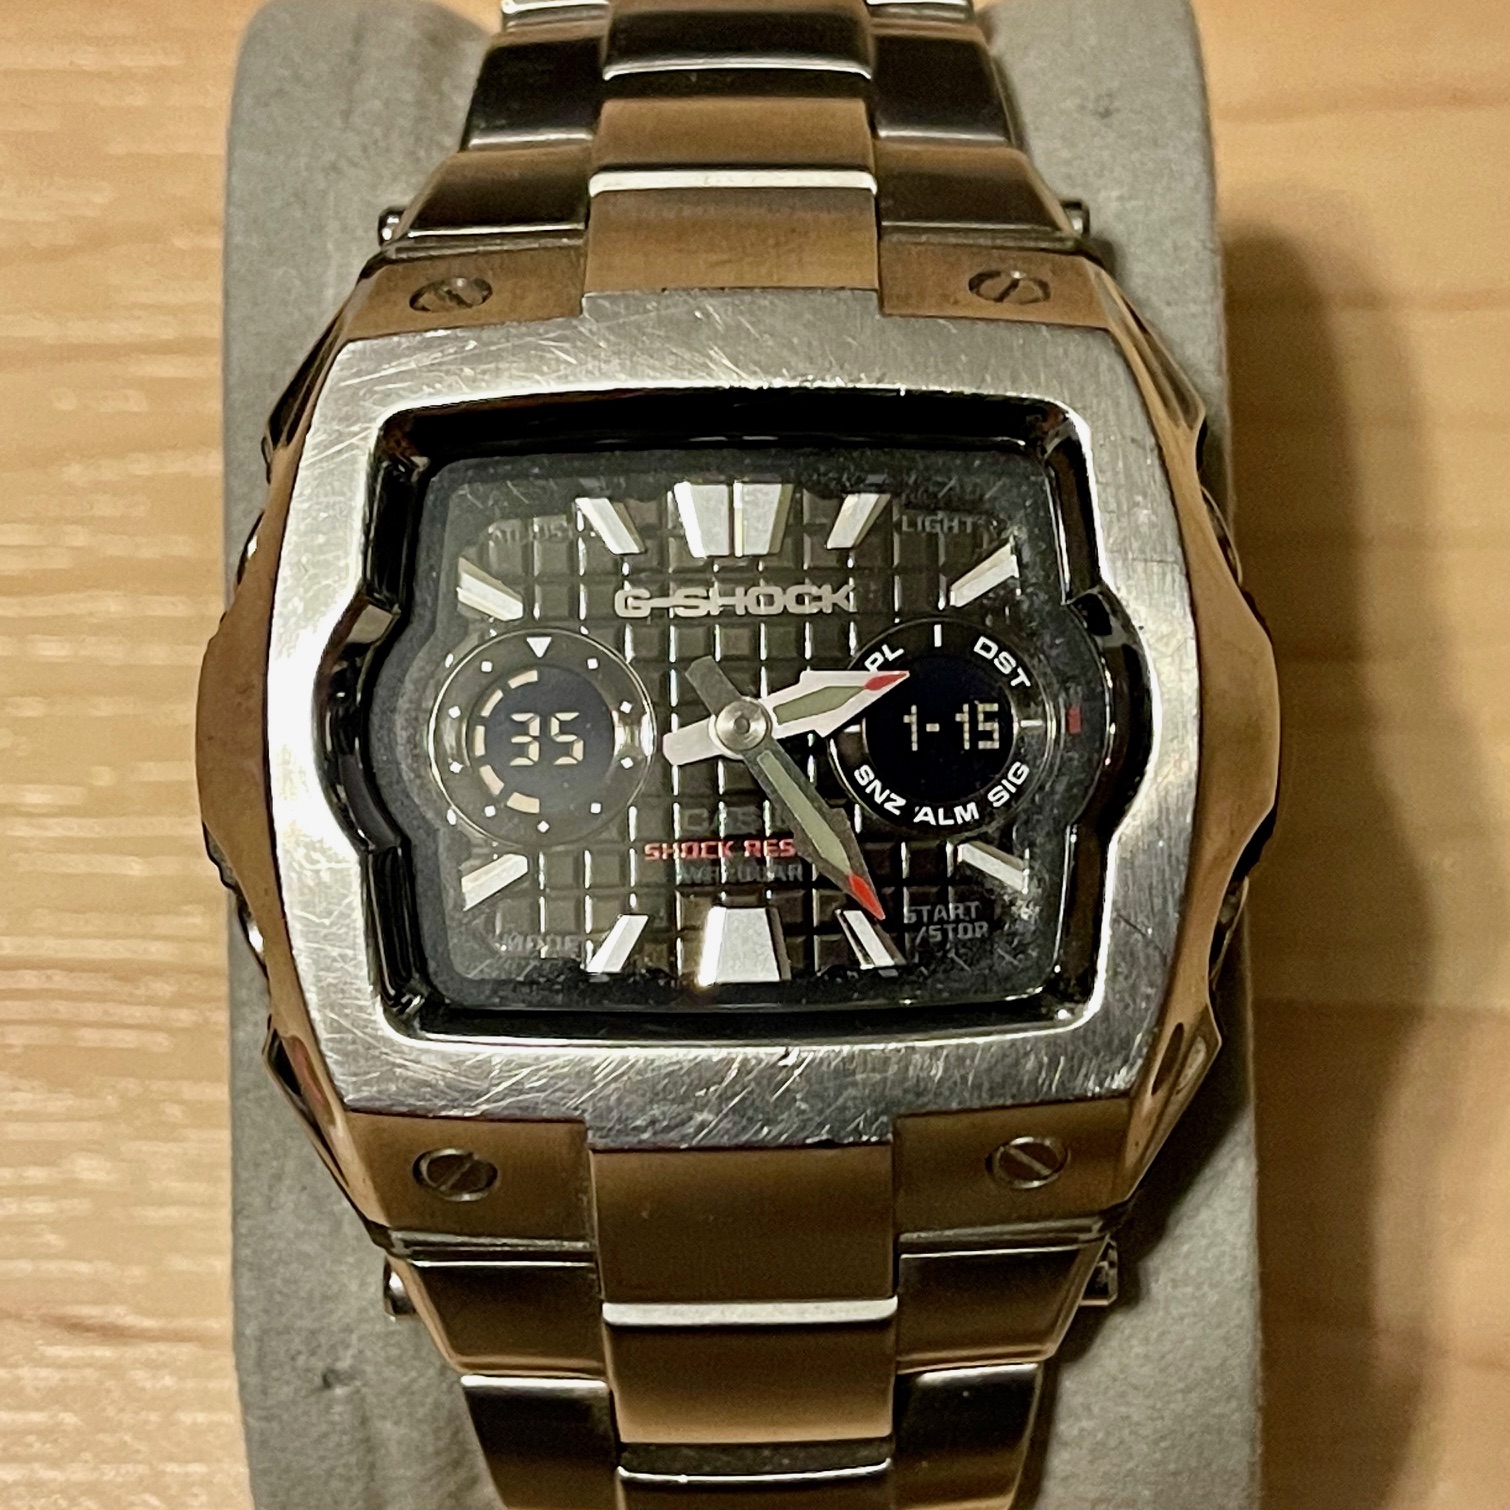 WTS] Casio G-Shock G-011D-1A “The Cube” Black Waffle Dial Steel